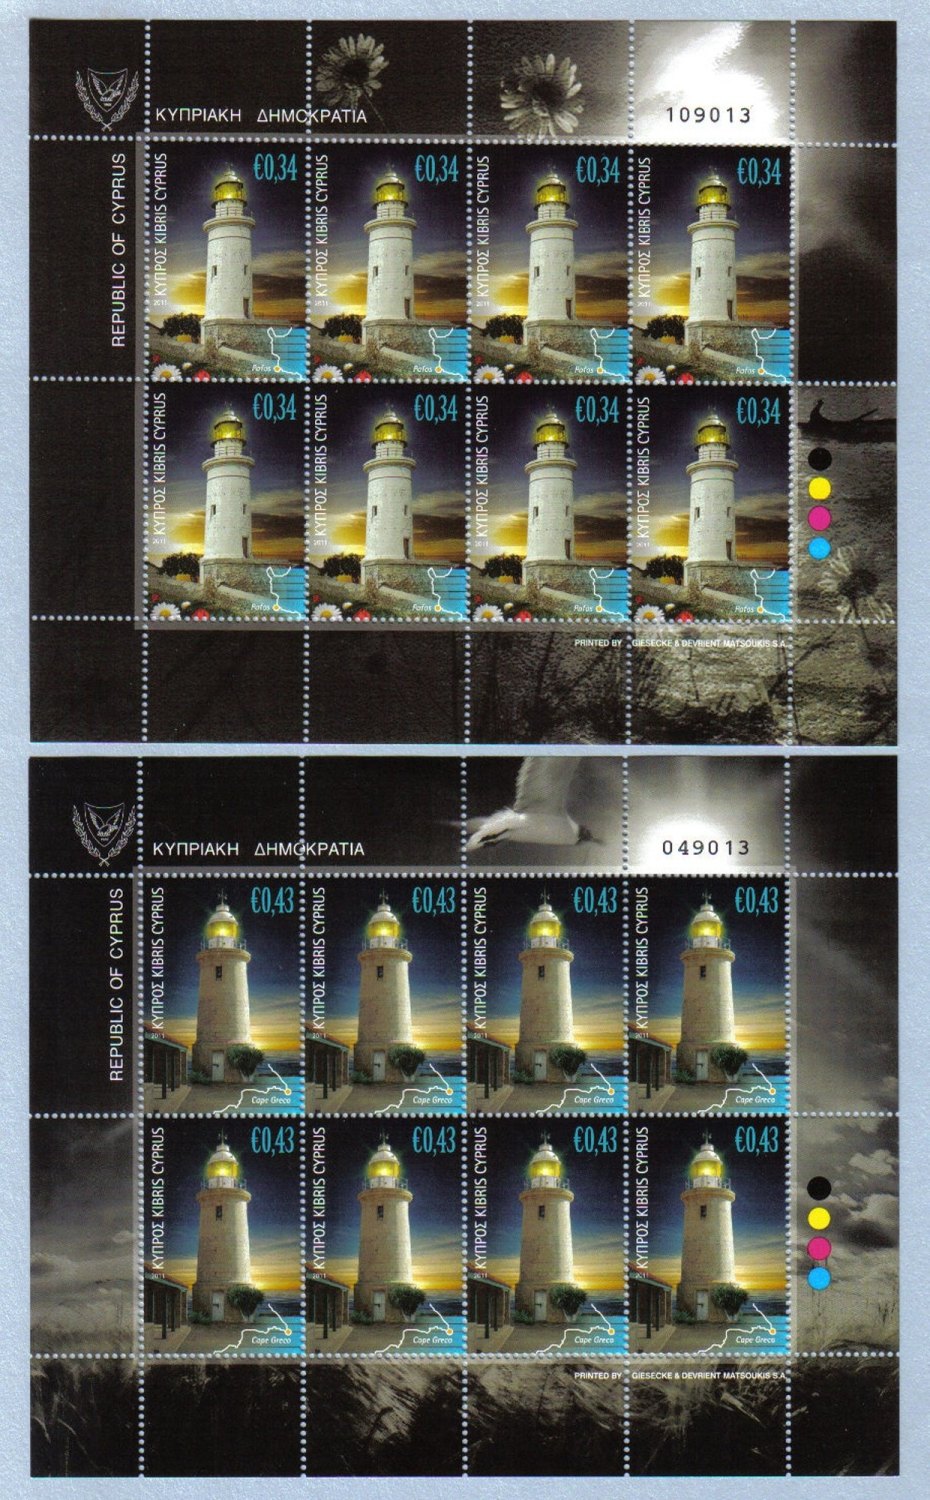 Cyprus Stamps SG 1248-49 2011 Lighthouses Full sheets - MINT